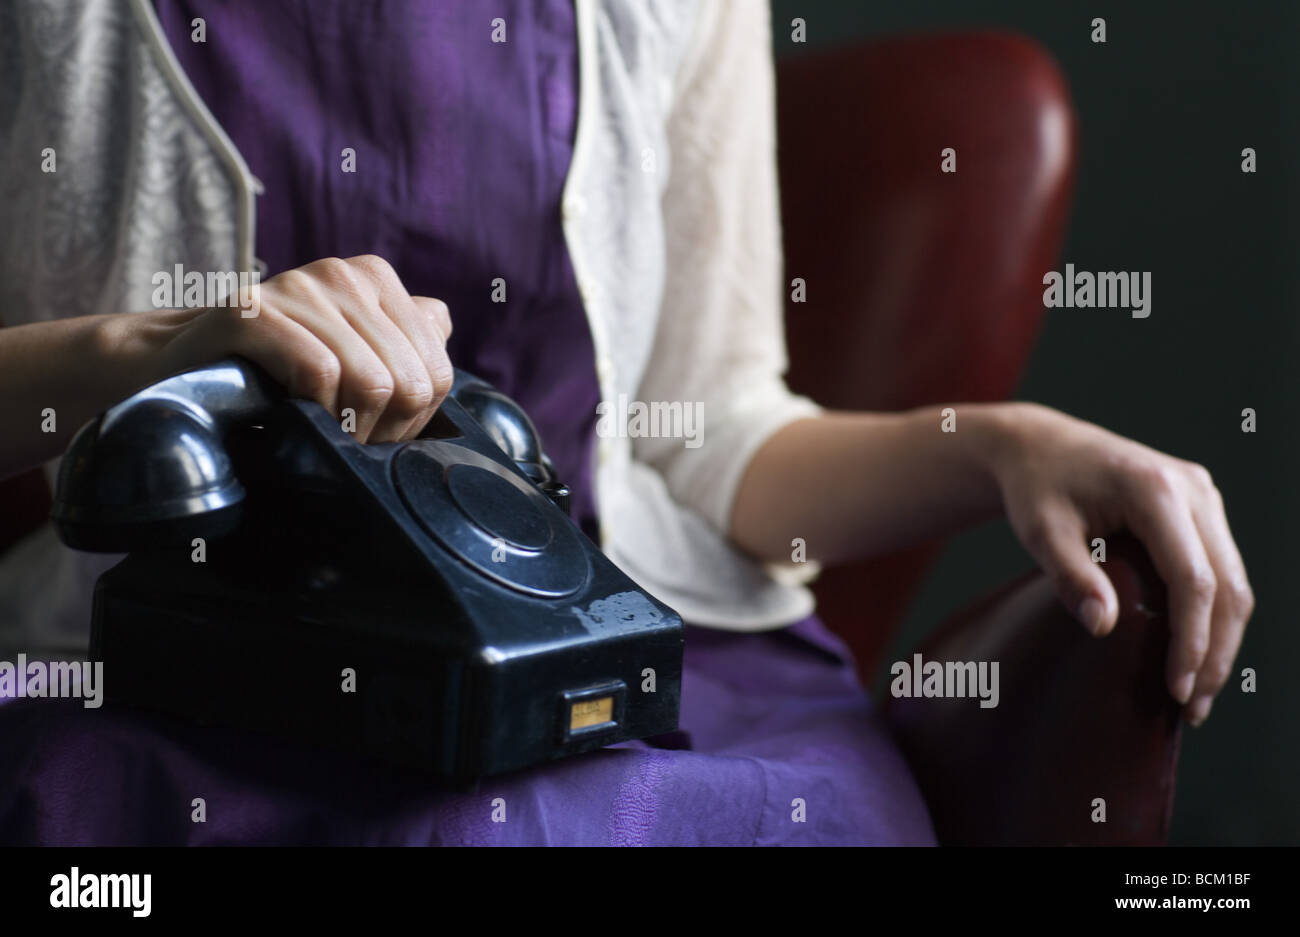 Woman in dress sitting with telephone on lap, hand on receiver, cropped view of mid section Stock Photo